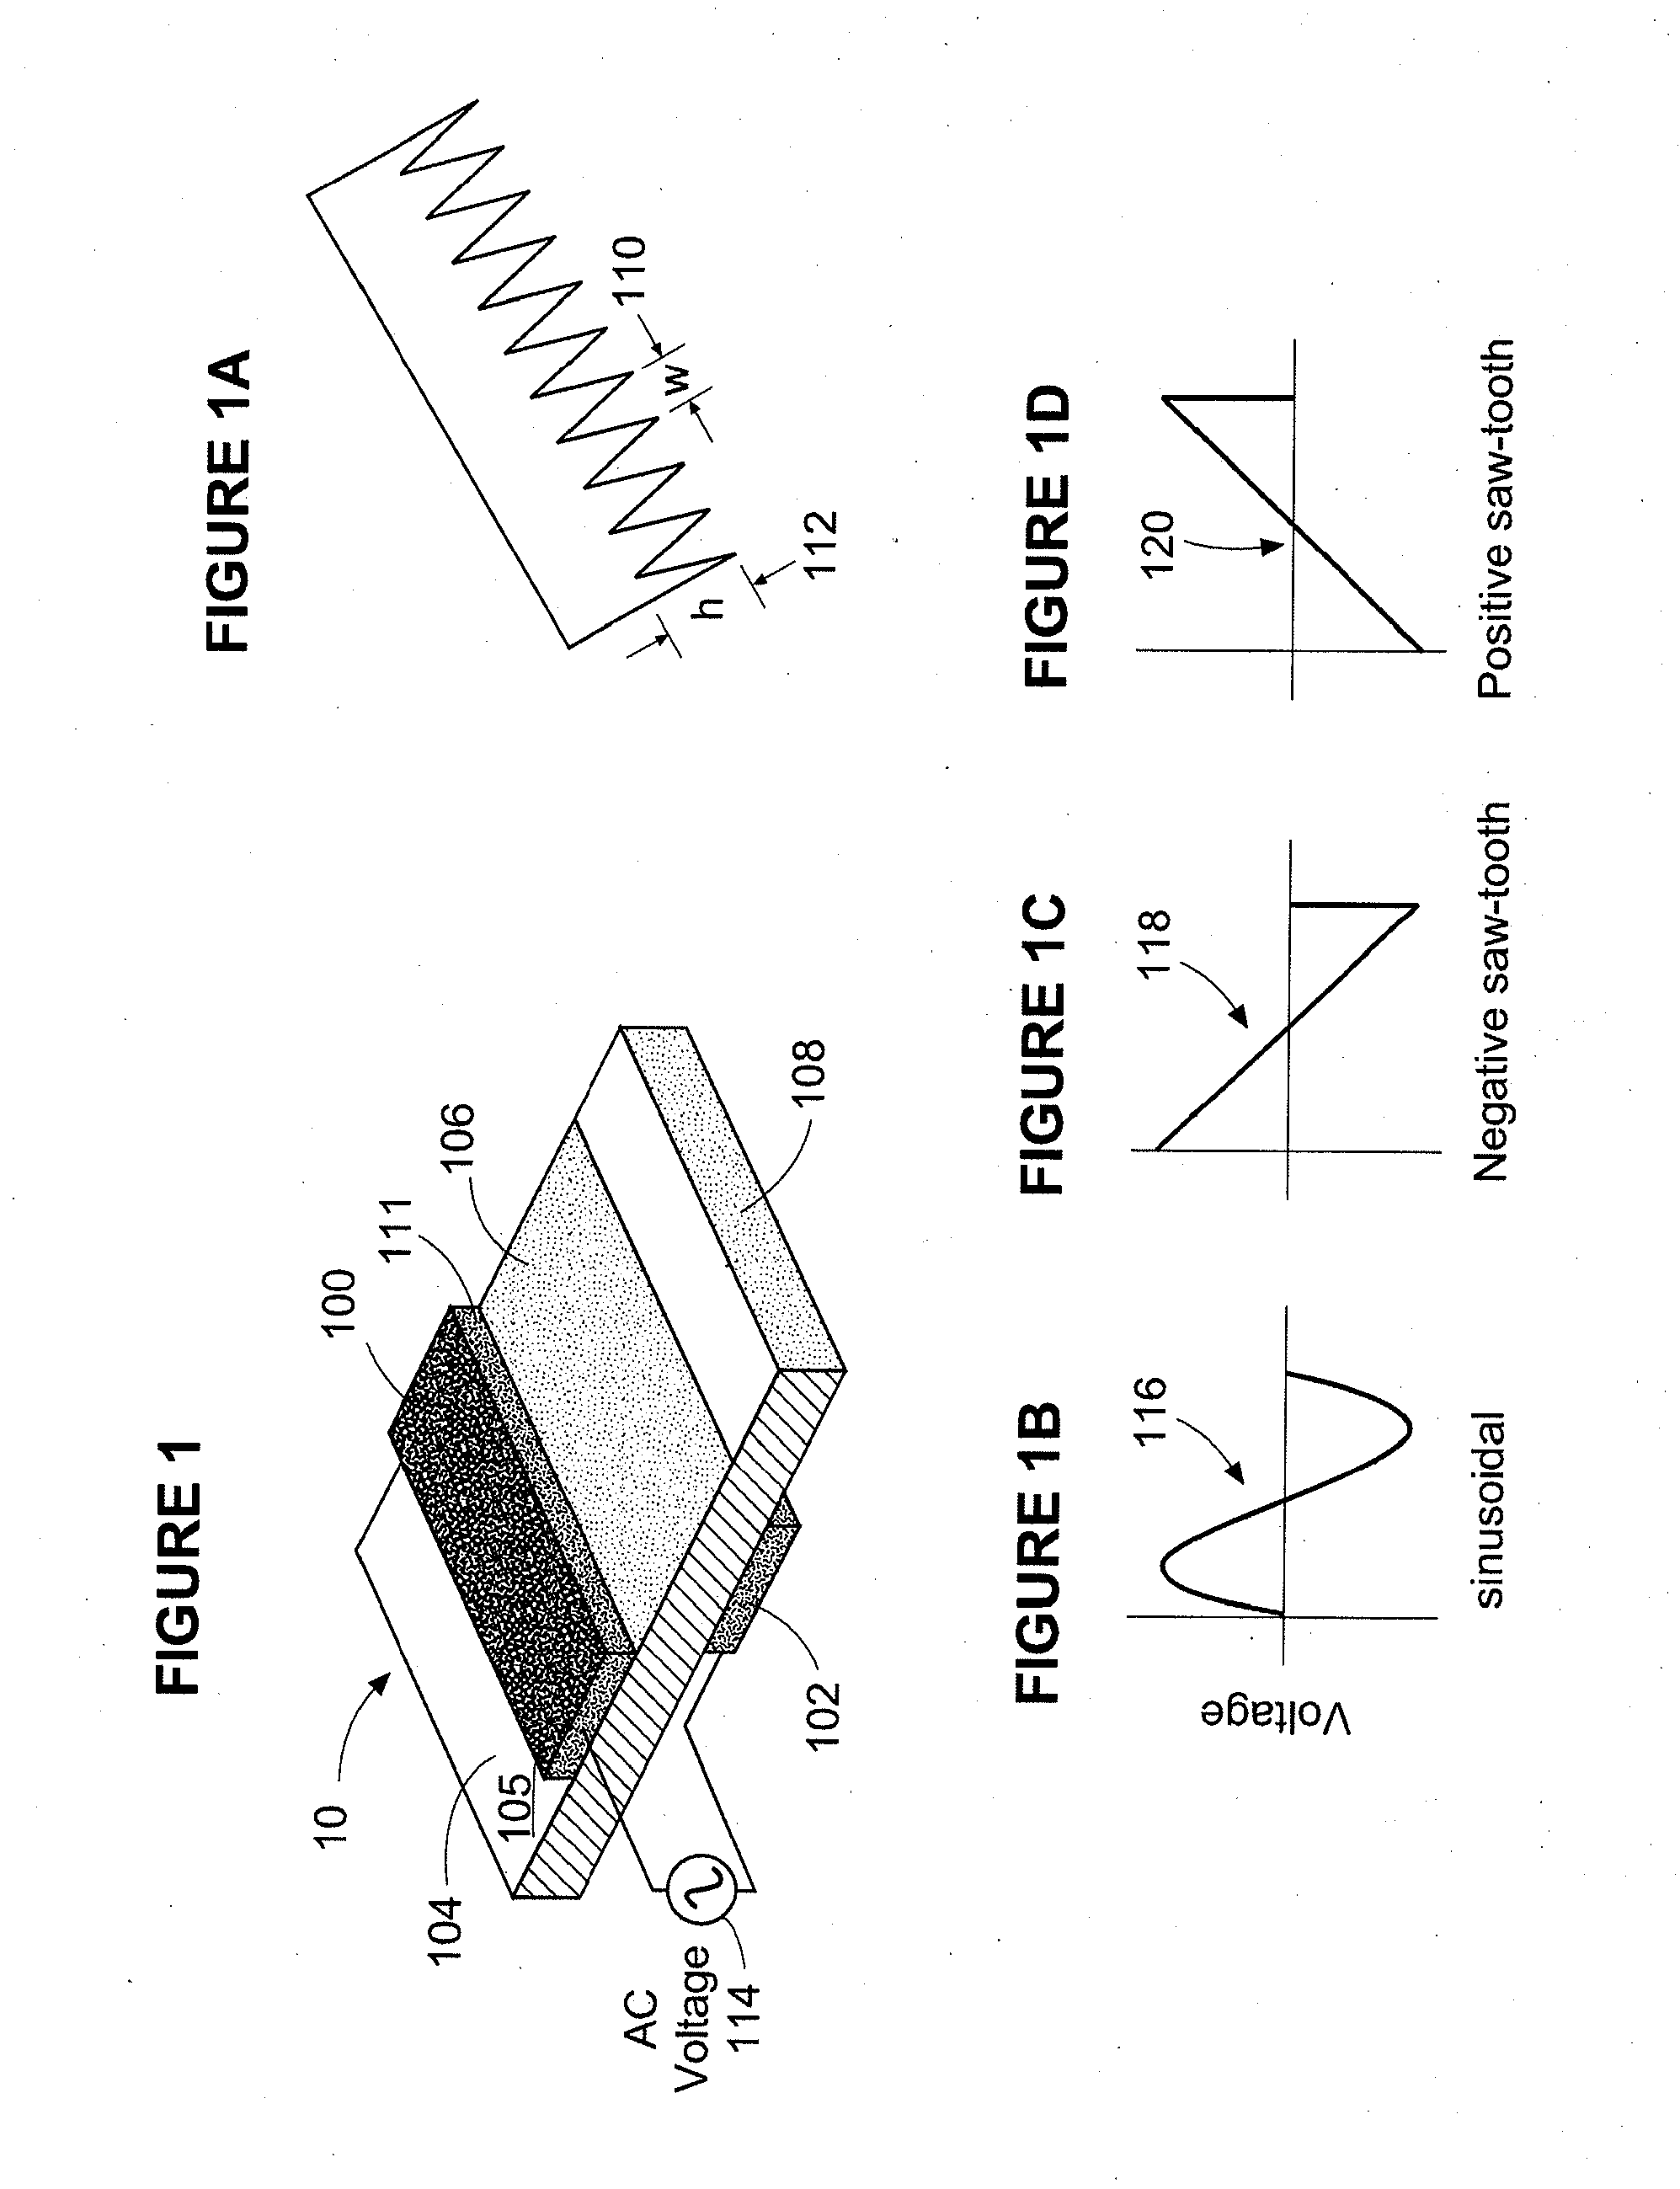 SINGLE DIELECTRIC BARRIER DISCHARGE PLASMA ACTUATORS WITH IN-PLASMA catalysts AND METHOD OF FABRICATING THE SAME